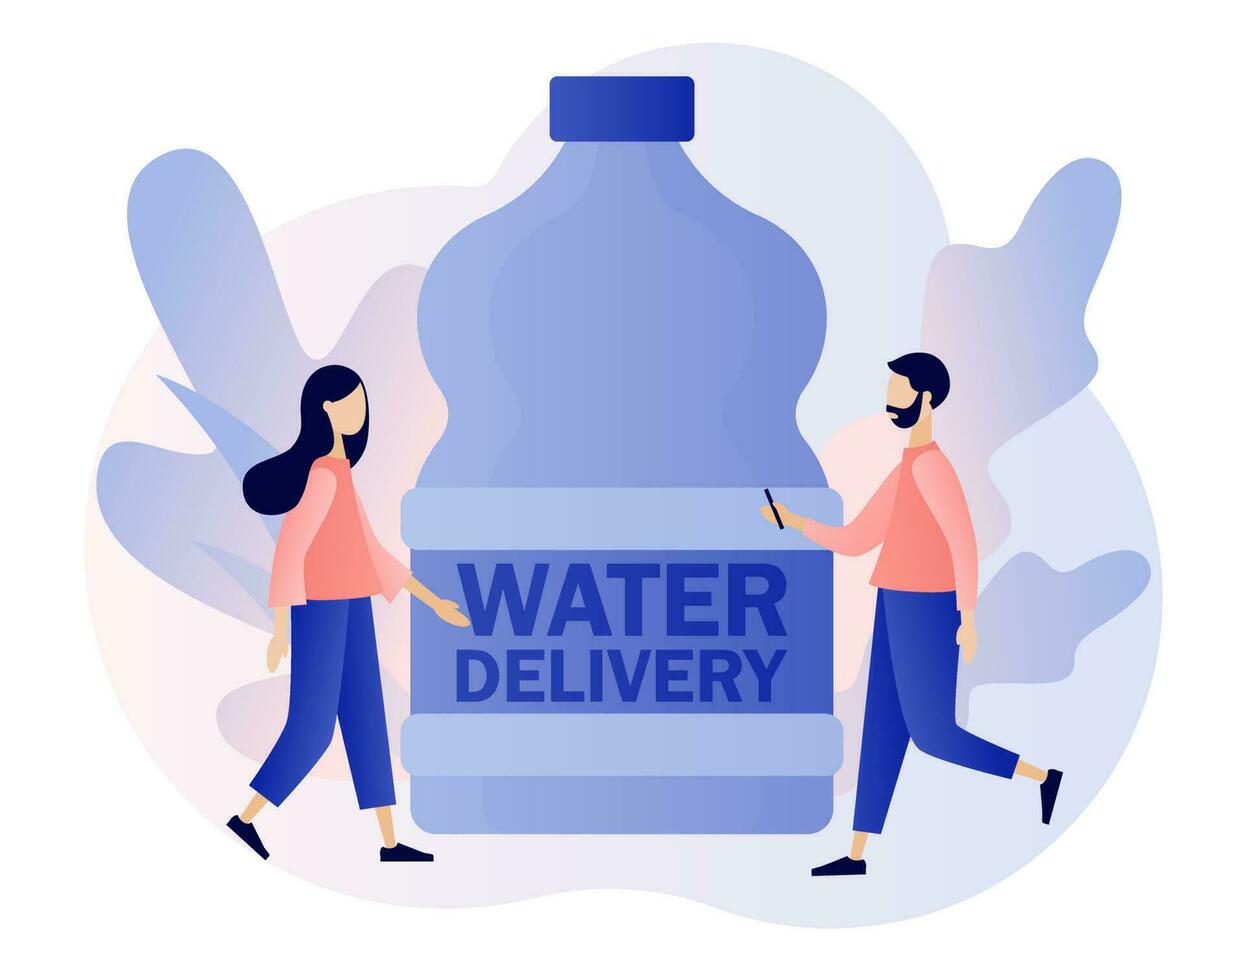 Water delivery service. Big bottle with clean water. Supply, shipping. Modern flat cartoon style. Vector illustration on white background